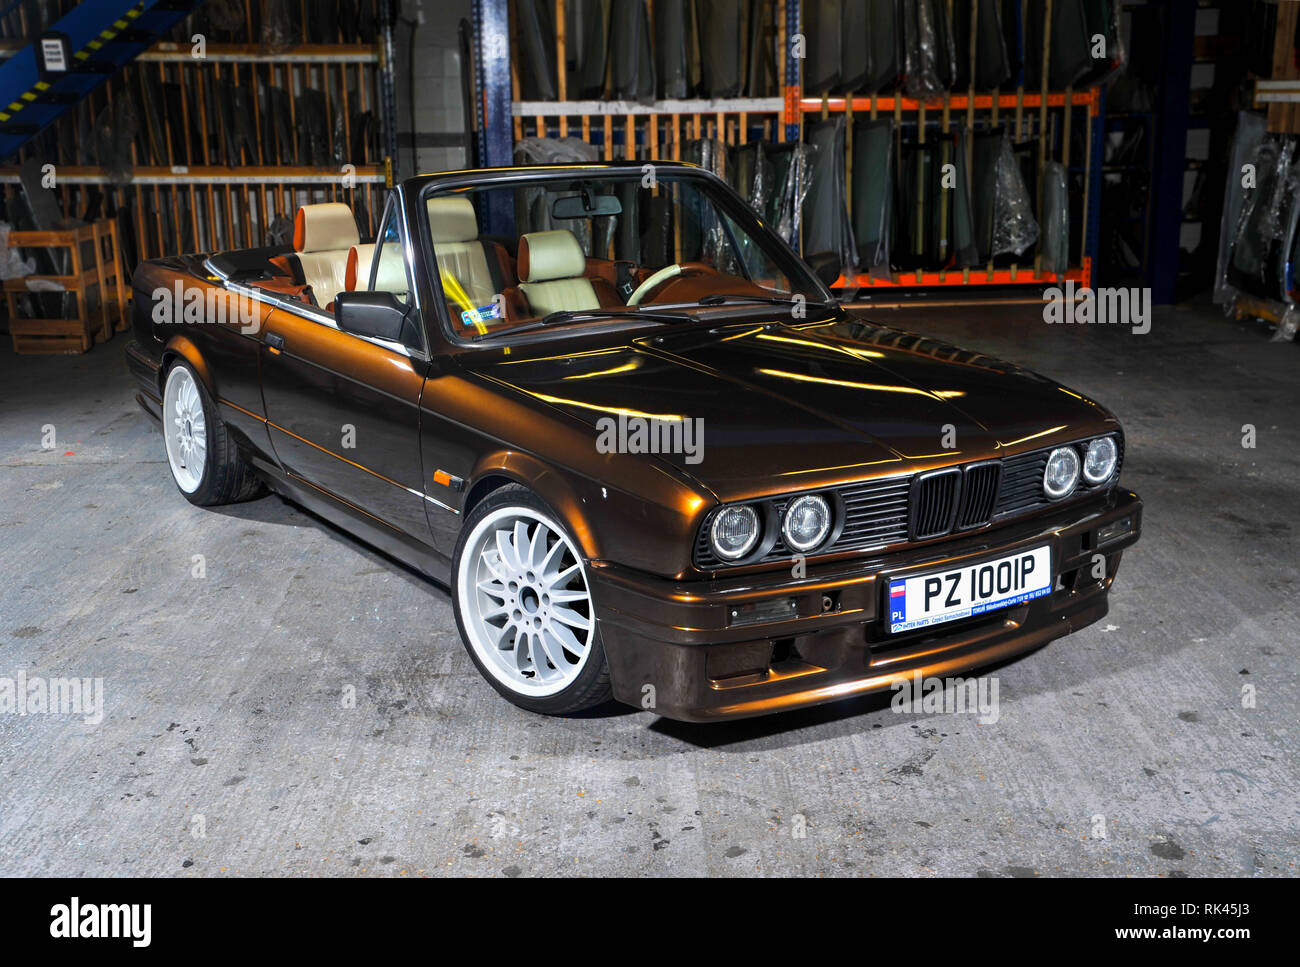 Bmw 0 3 Series Convertible Modified With A V8 Engine Stock Photo Alamy